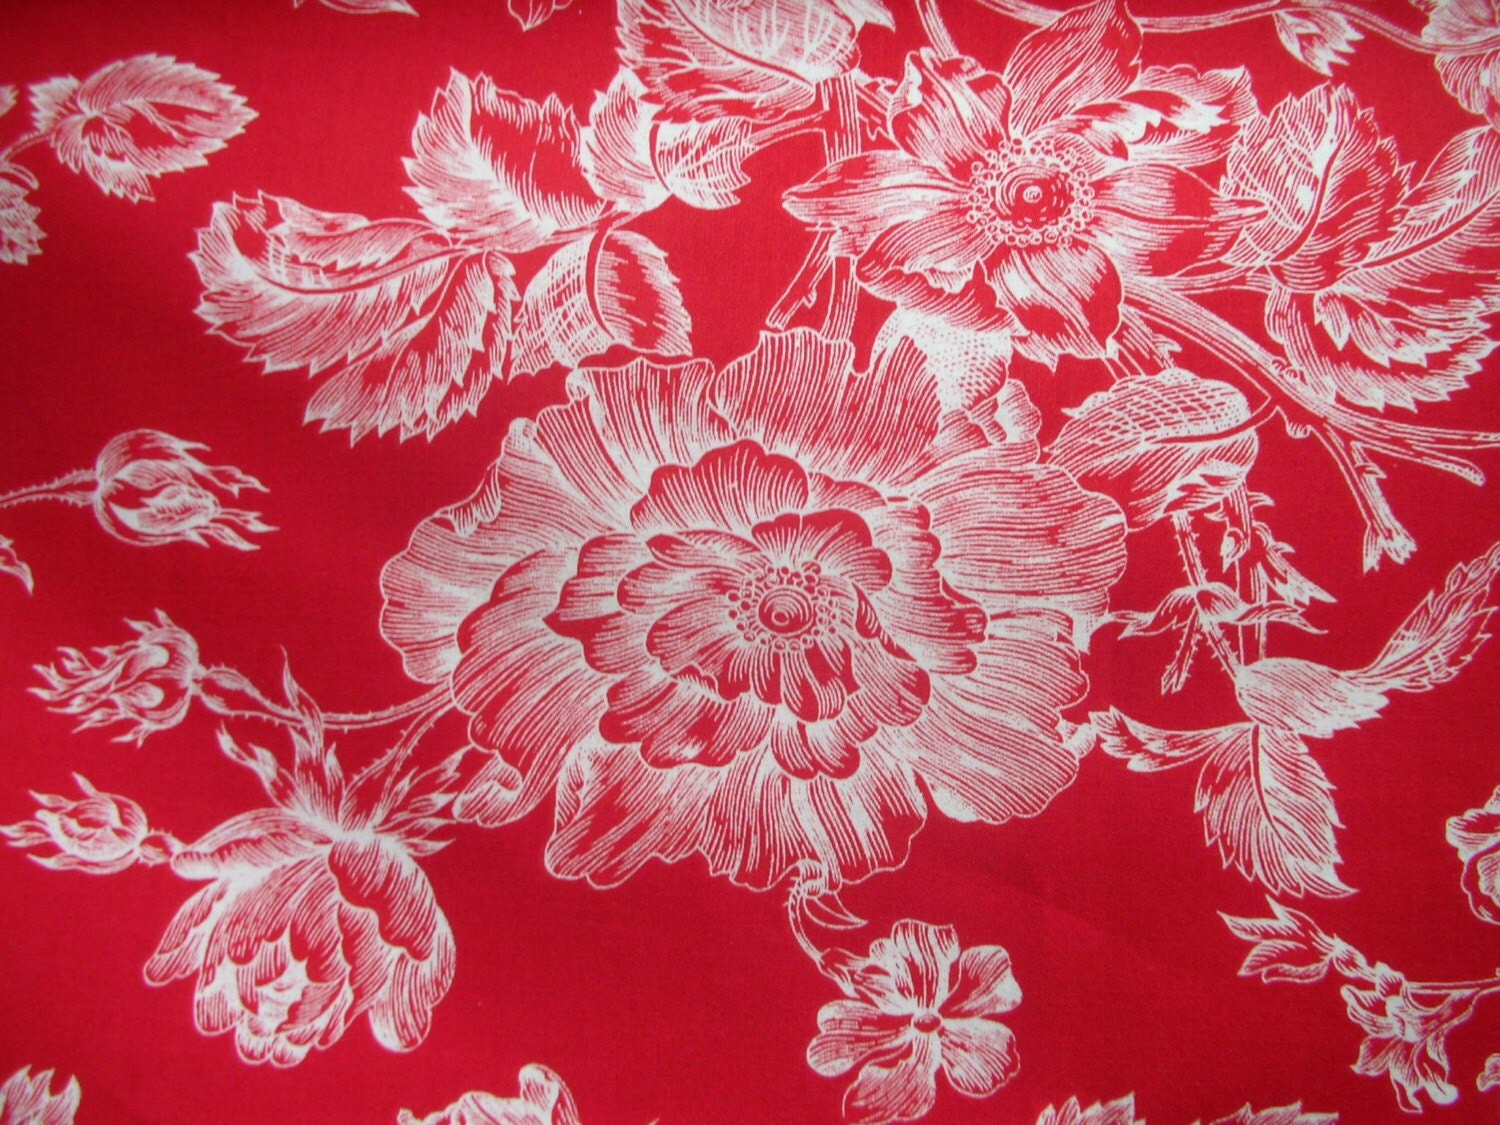 A standout toile with dark cherry red background with white